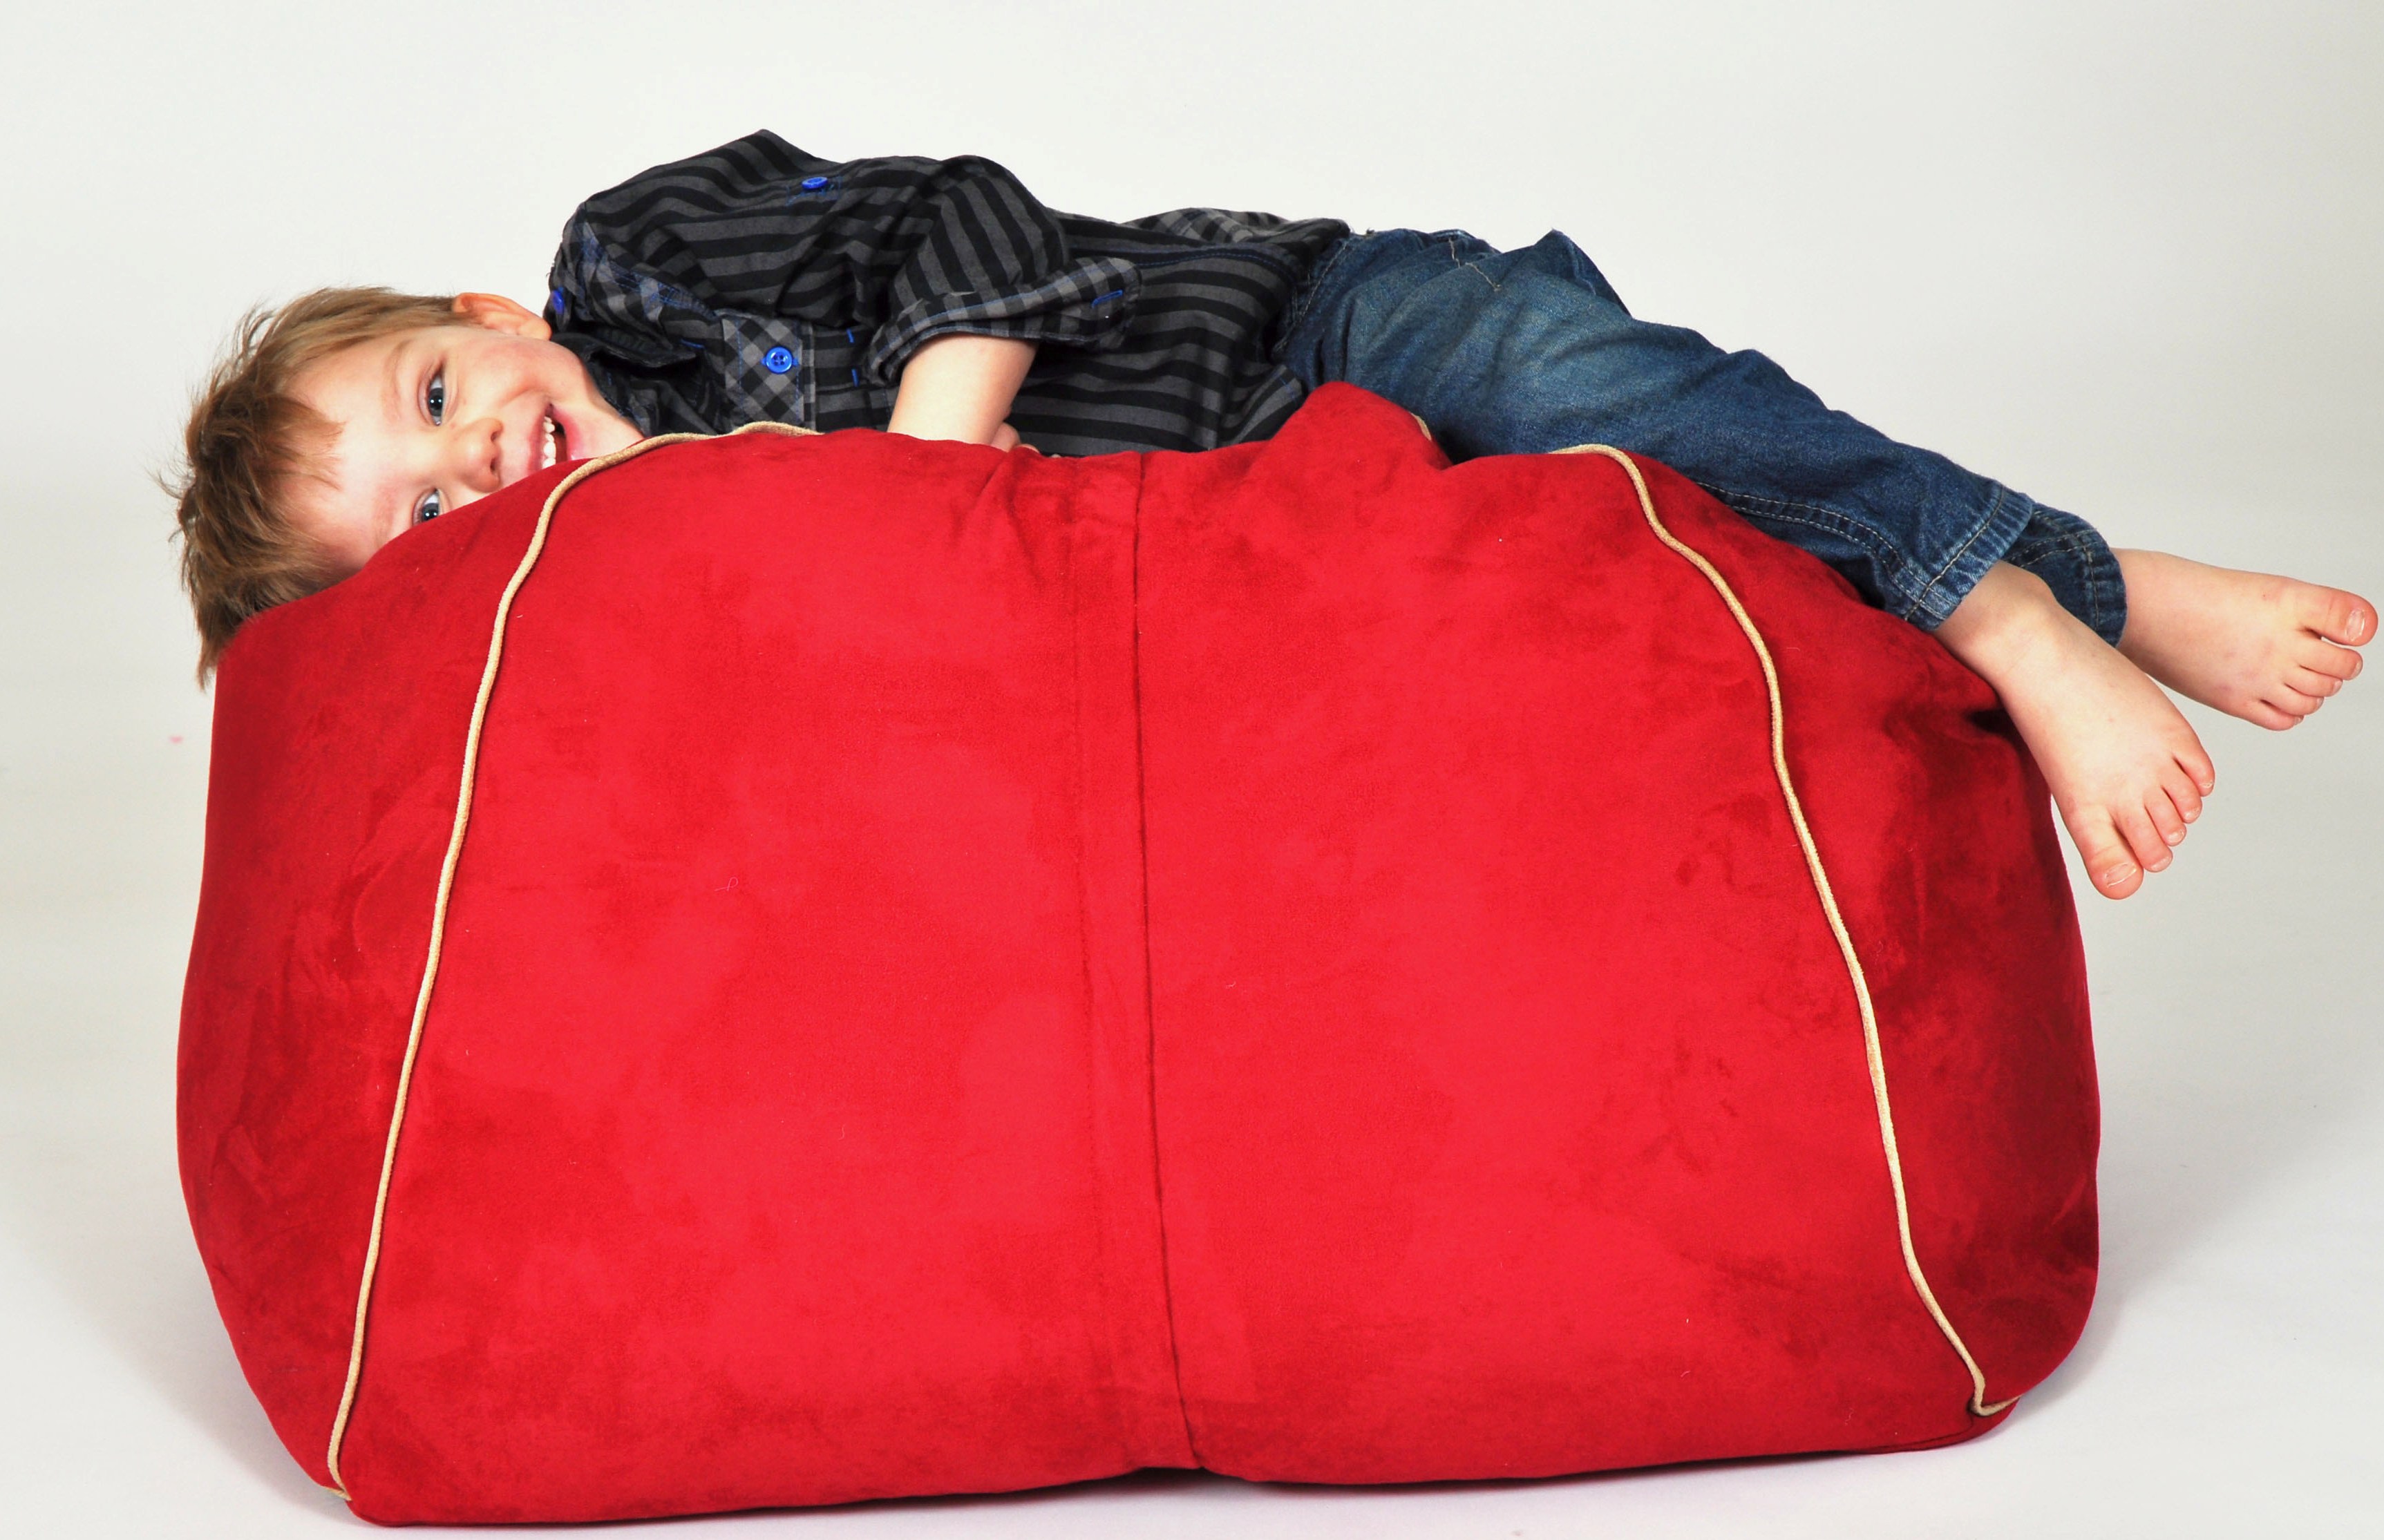 New Pint Sized Bean Bag Chairs From The Man Chair Co Extend The Life